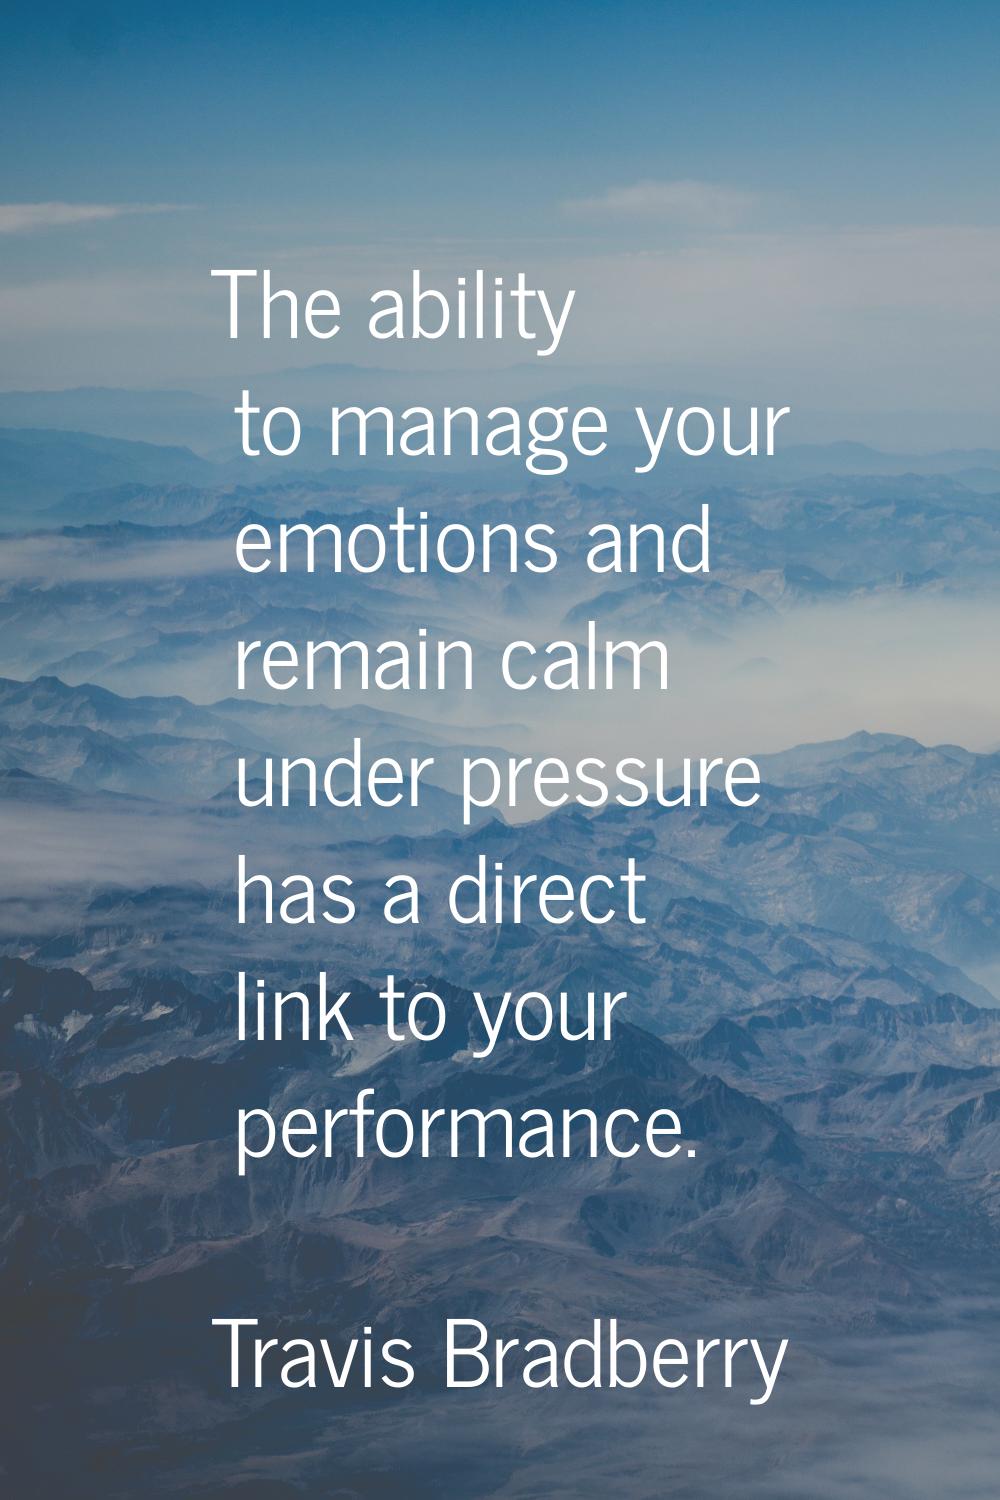 The ability to manage your emotions and remain calm under pressure has a direct link to your perfor